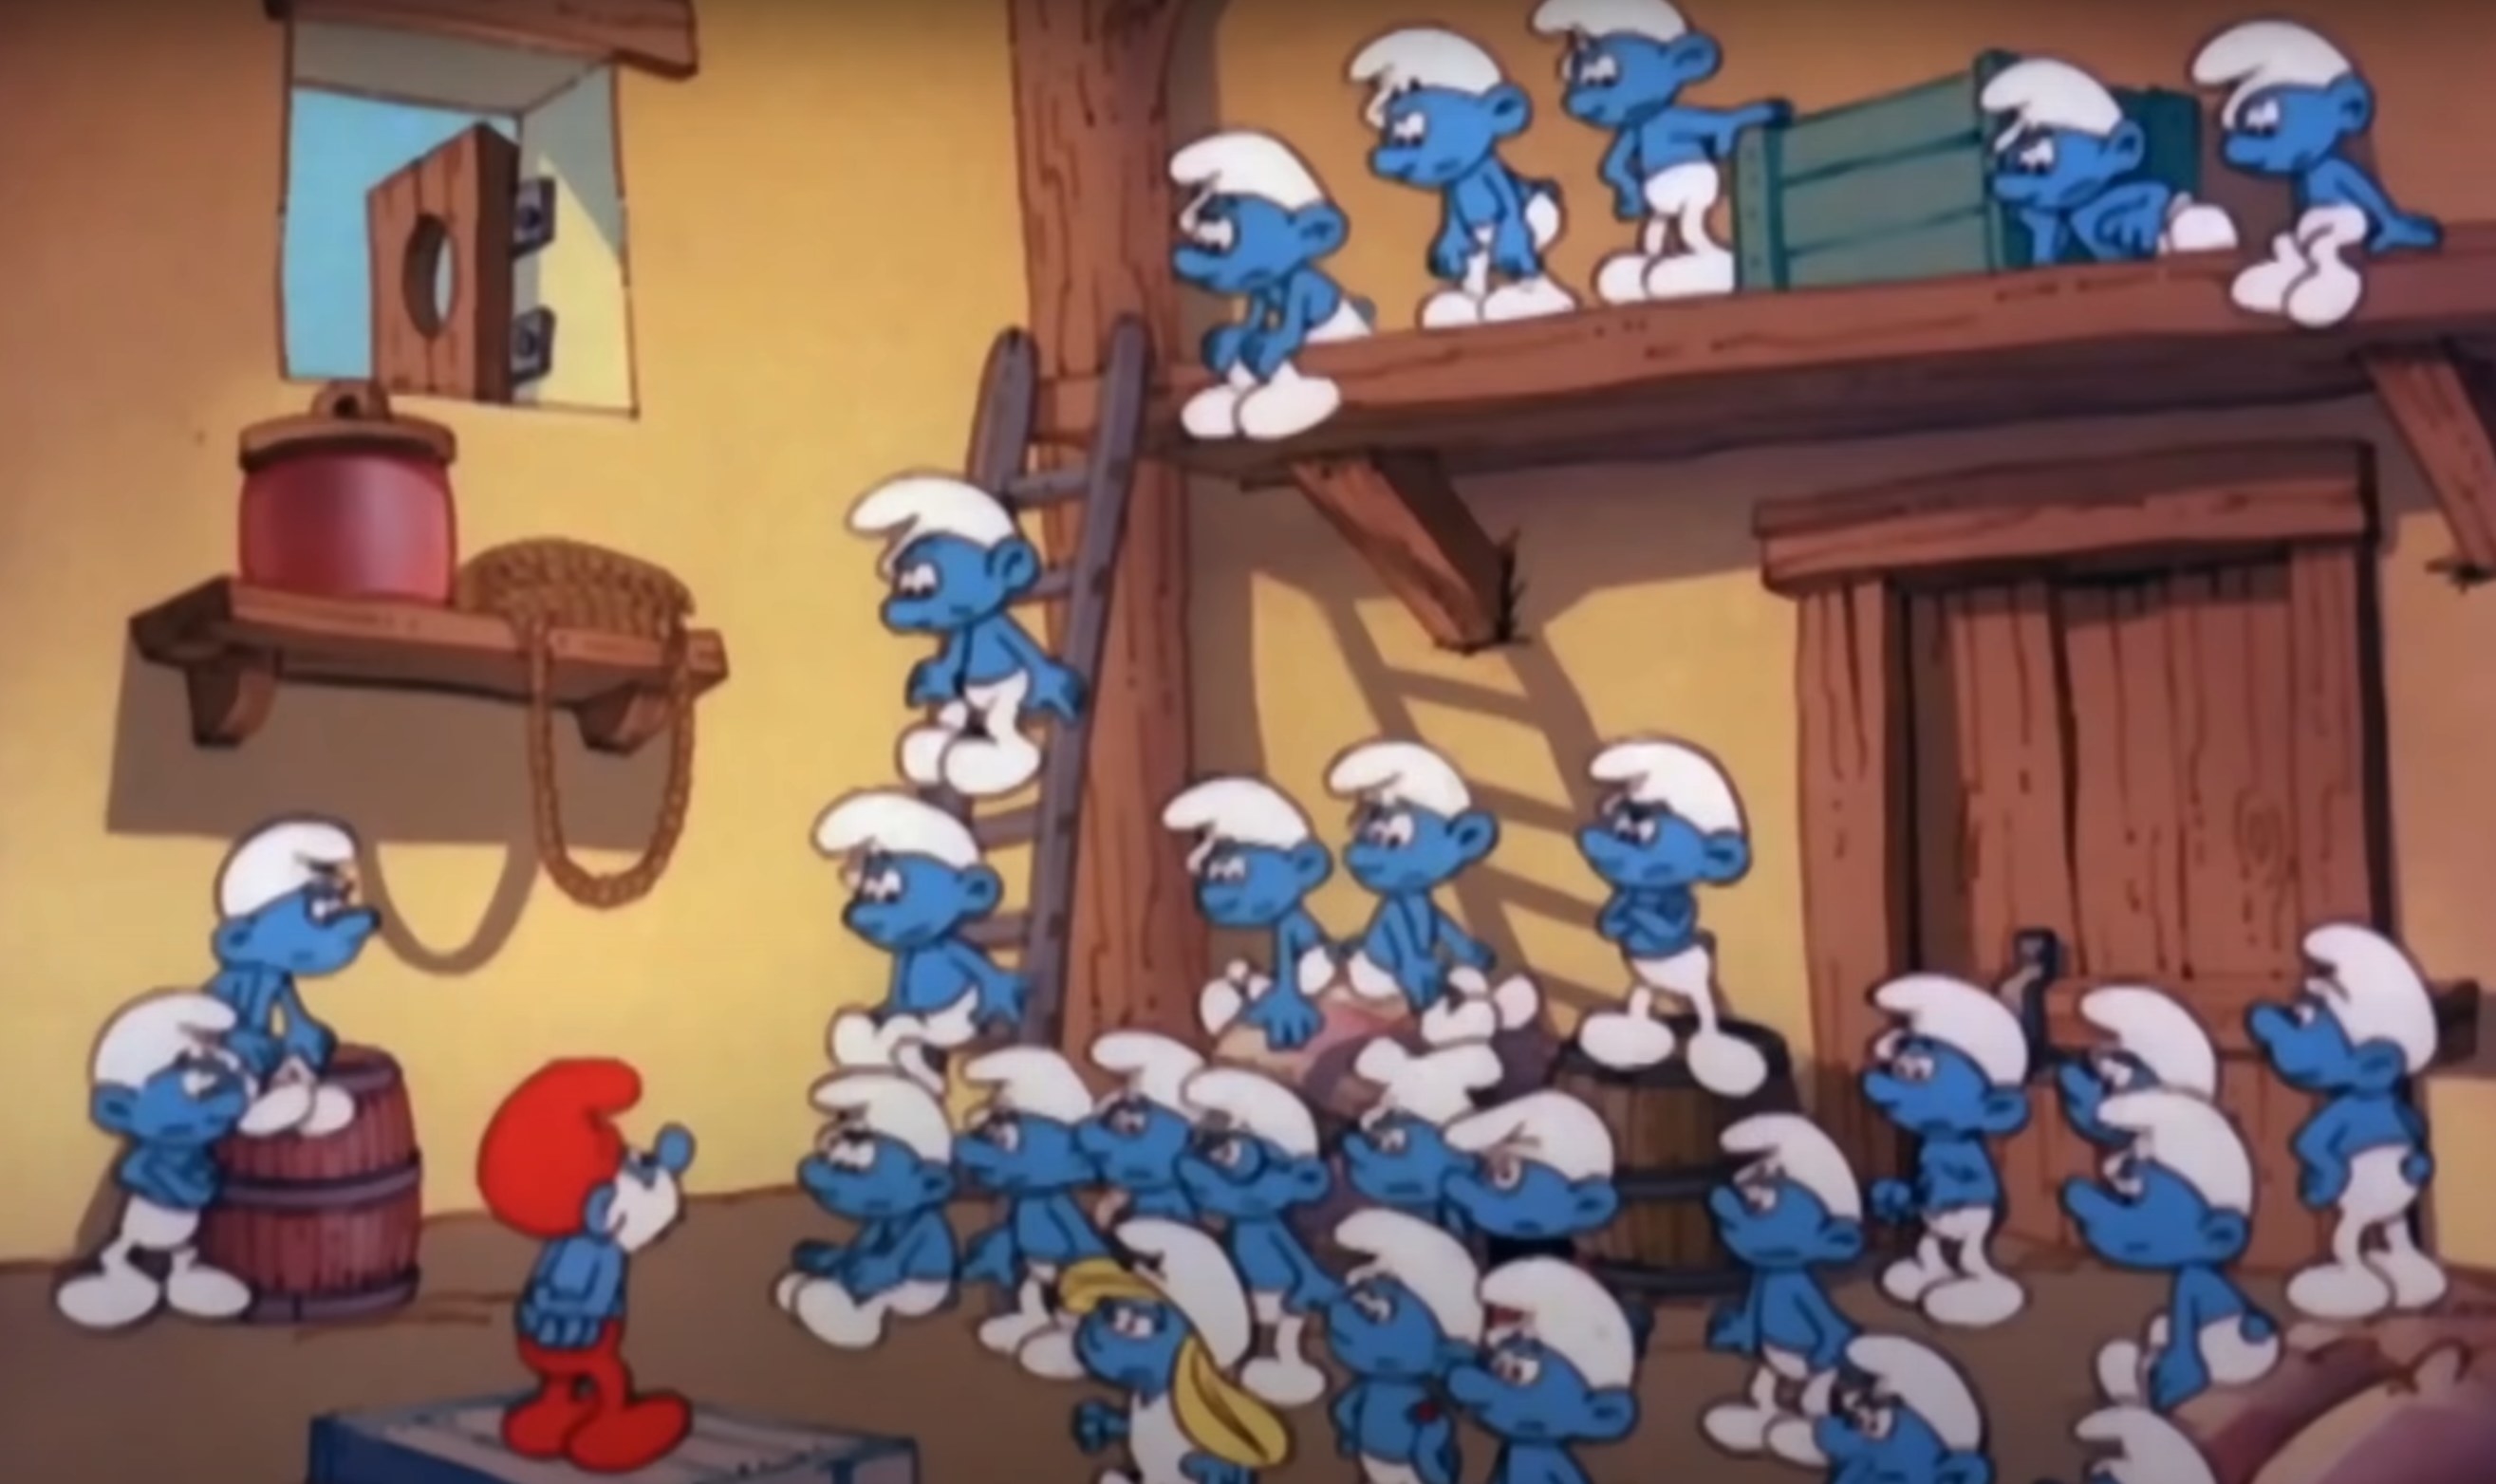 The Smurfs gather and listen to Papa Smurf